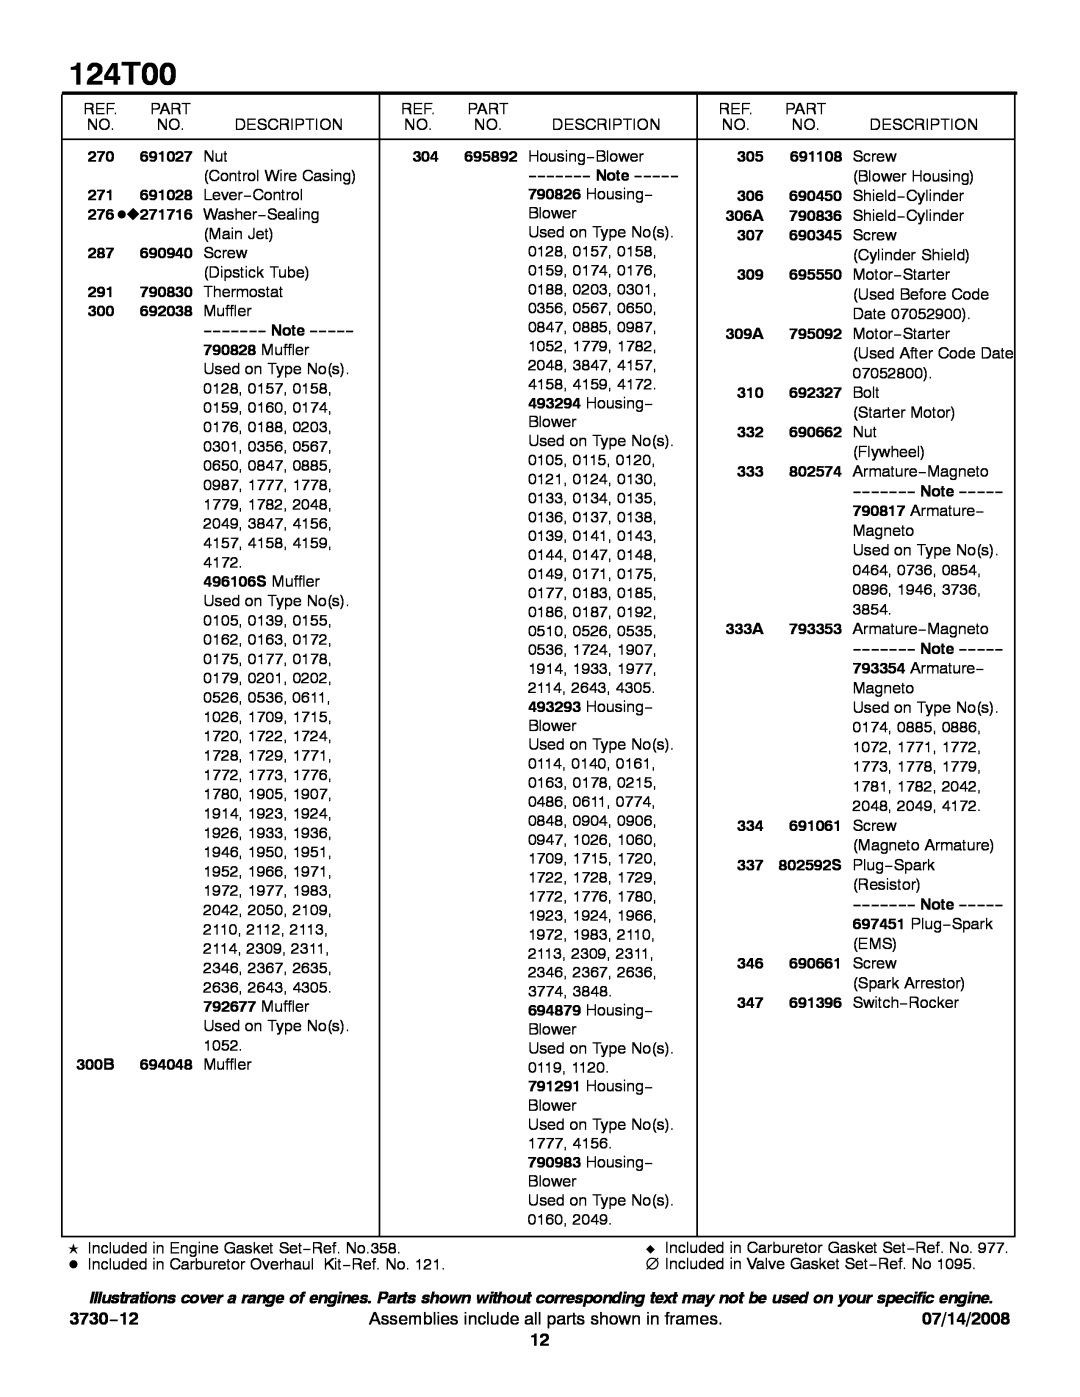 Snapper 124T00 service manual 3730−12, Assemblies include all parts shown in frames, 07/14/2008 